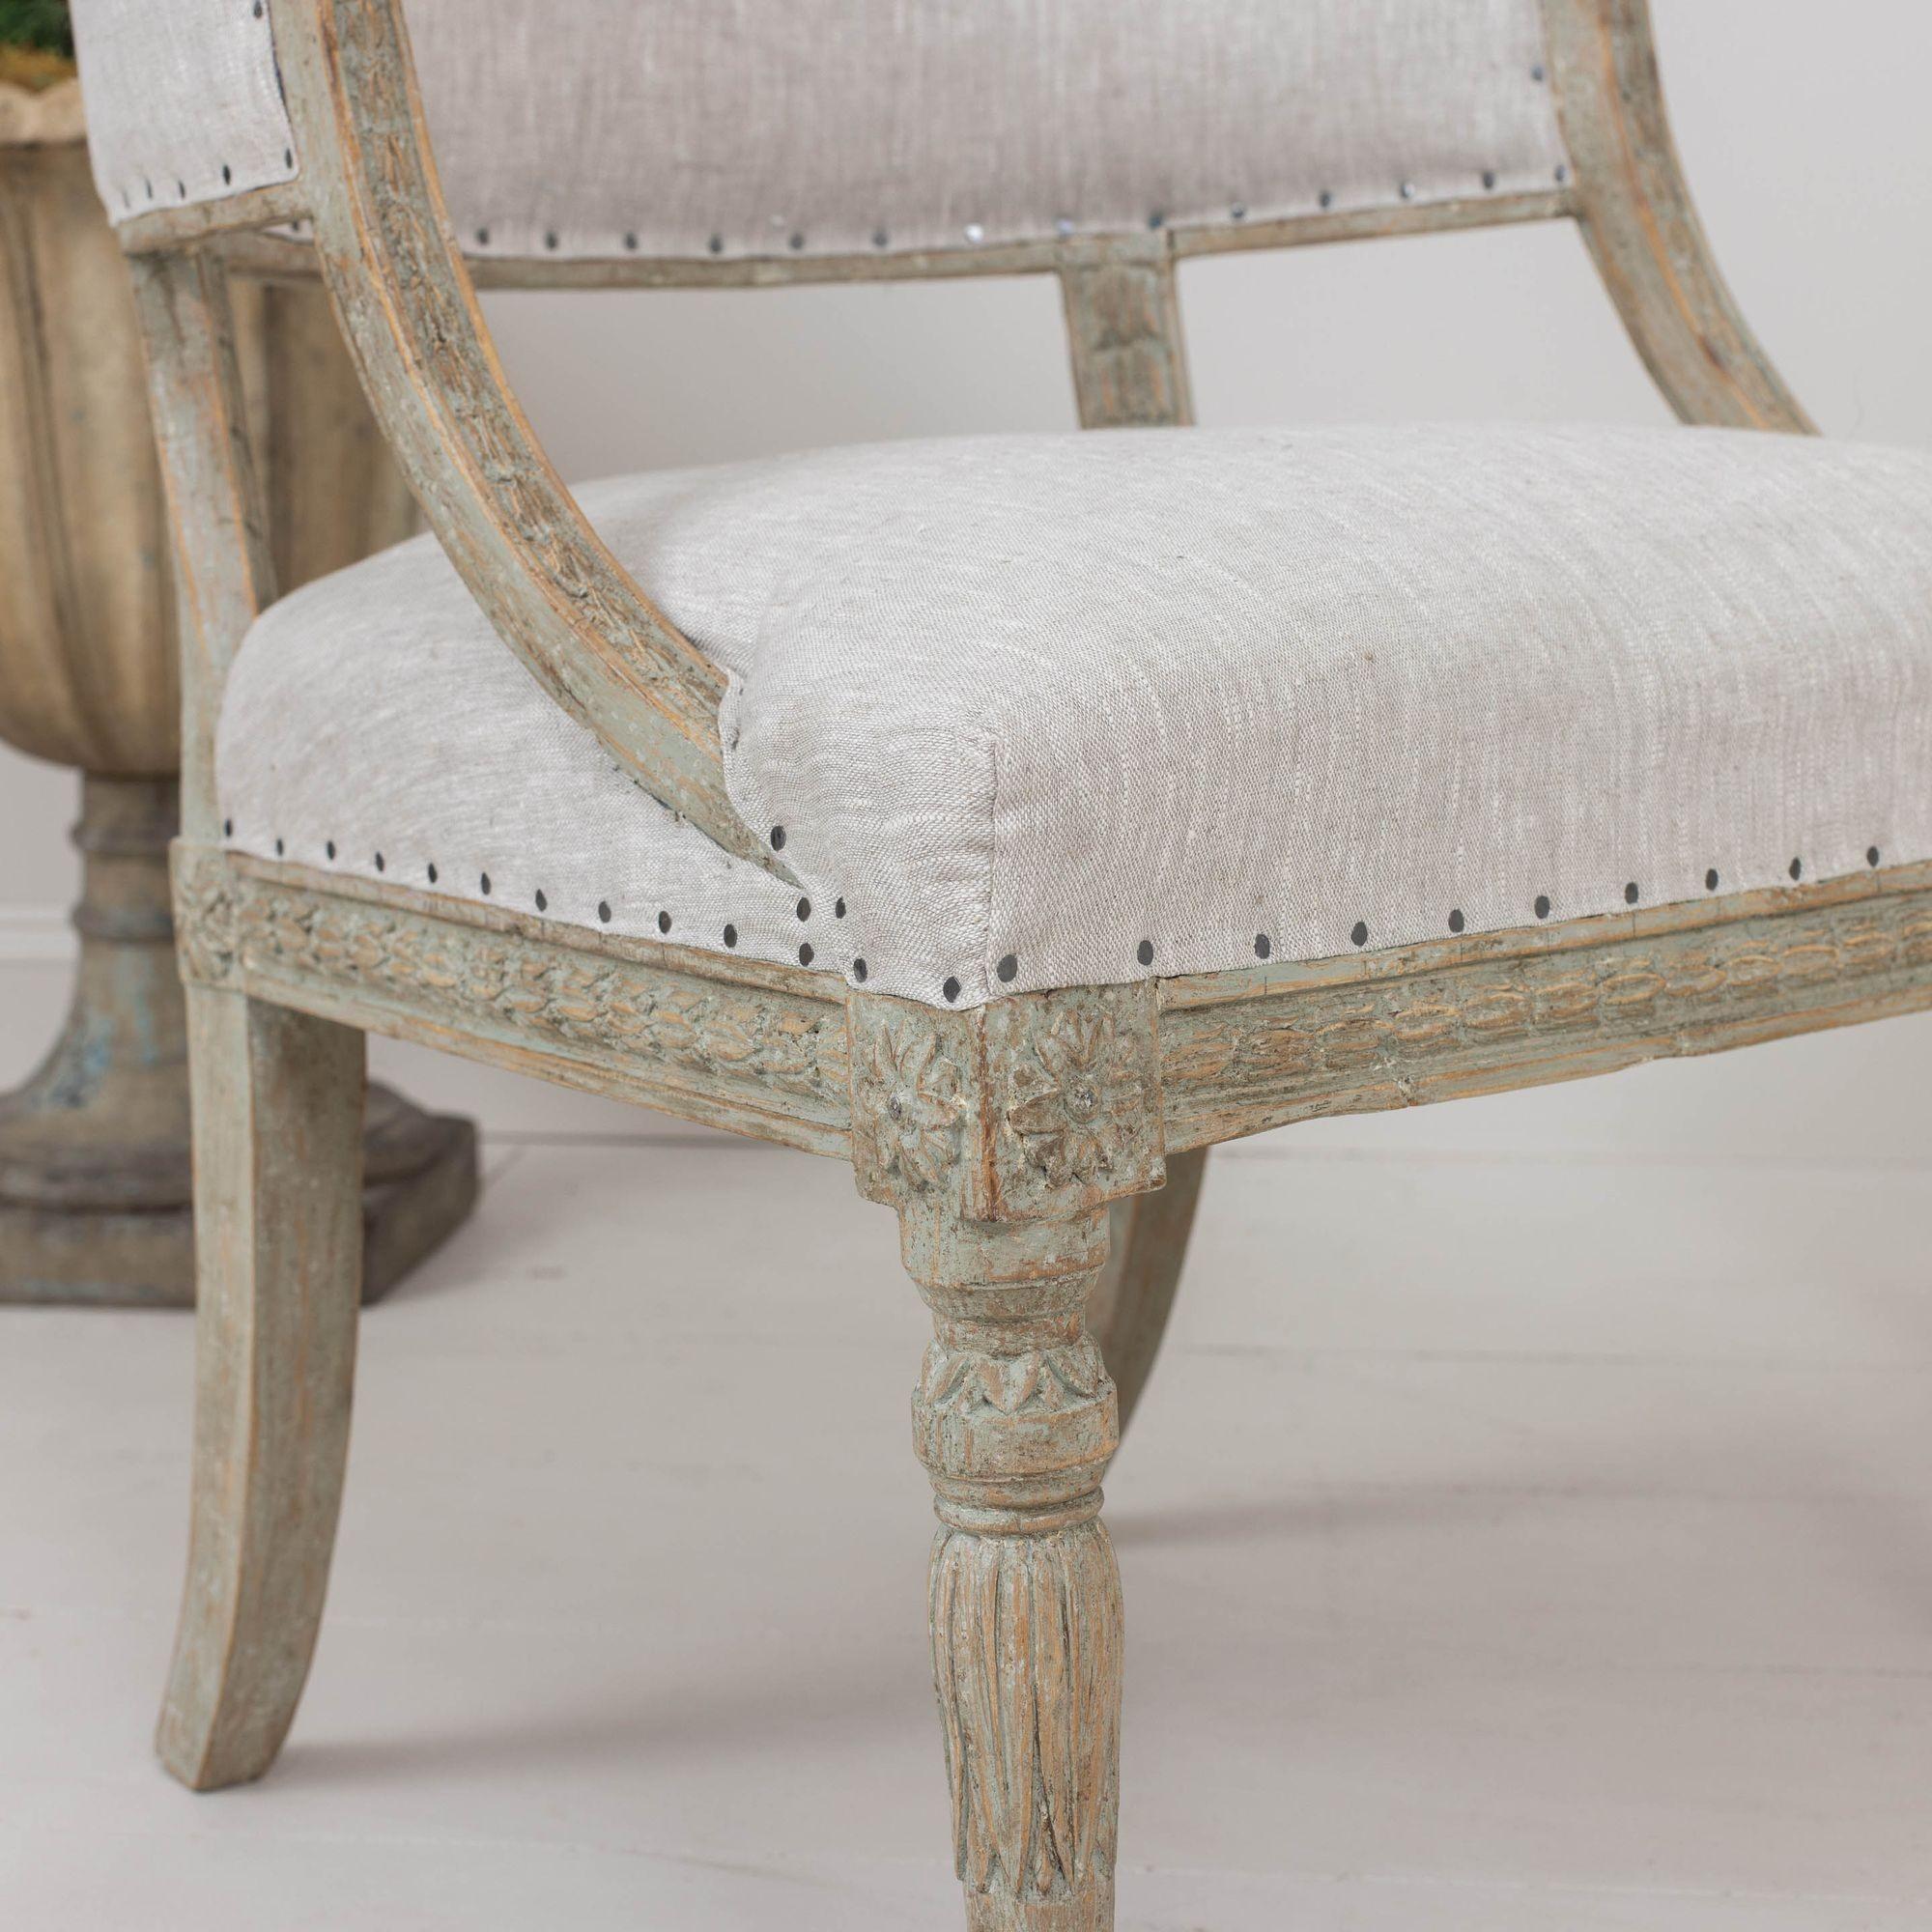 19th Century 19th c. Pair of Swedish Gustavian Painted Barrel Back Armchairs For Sale